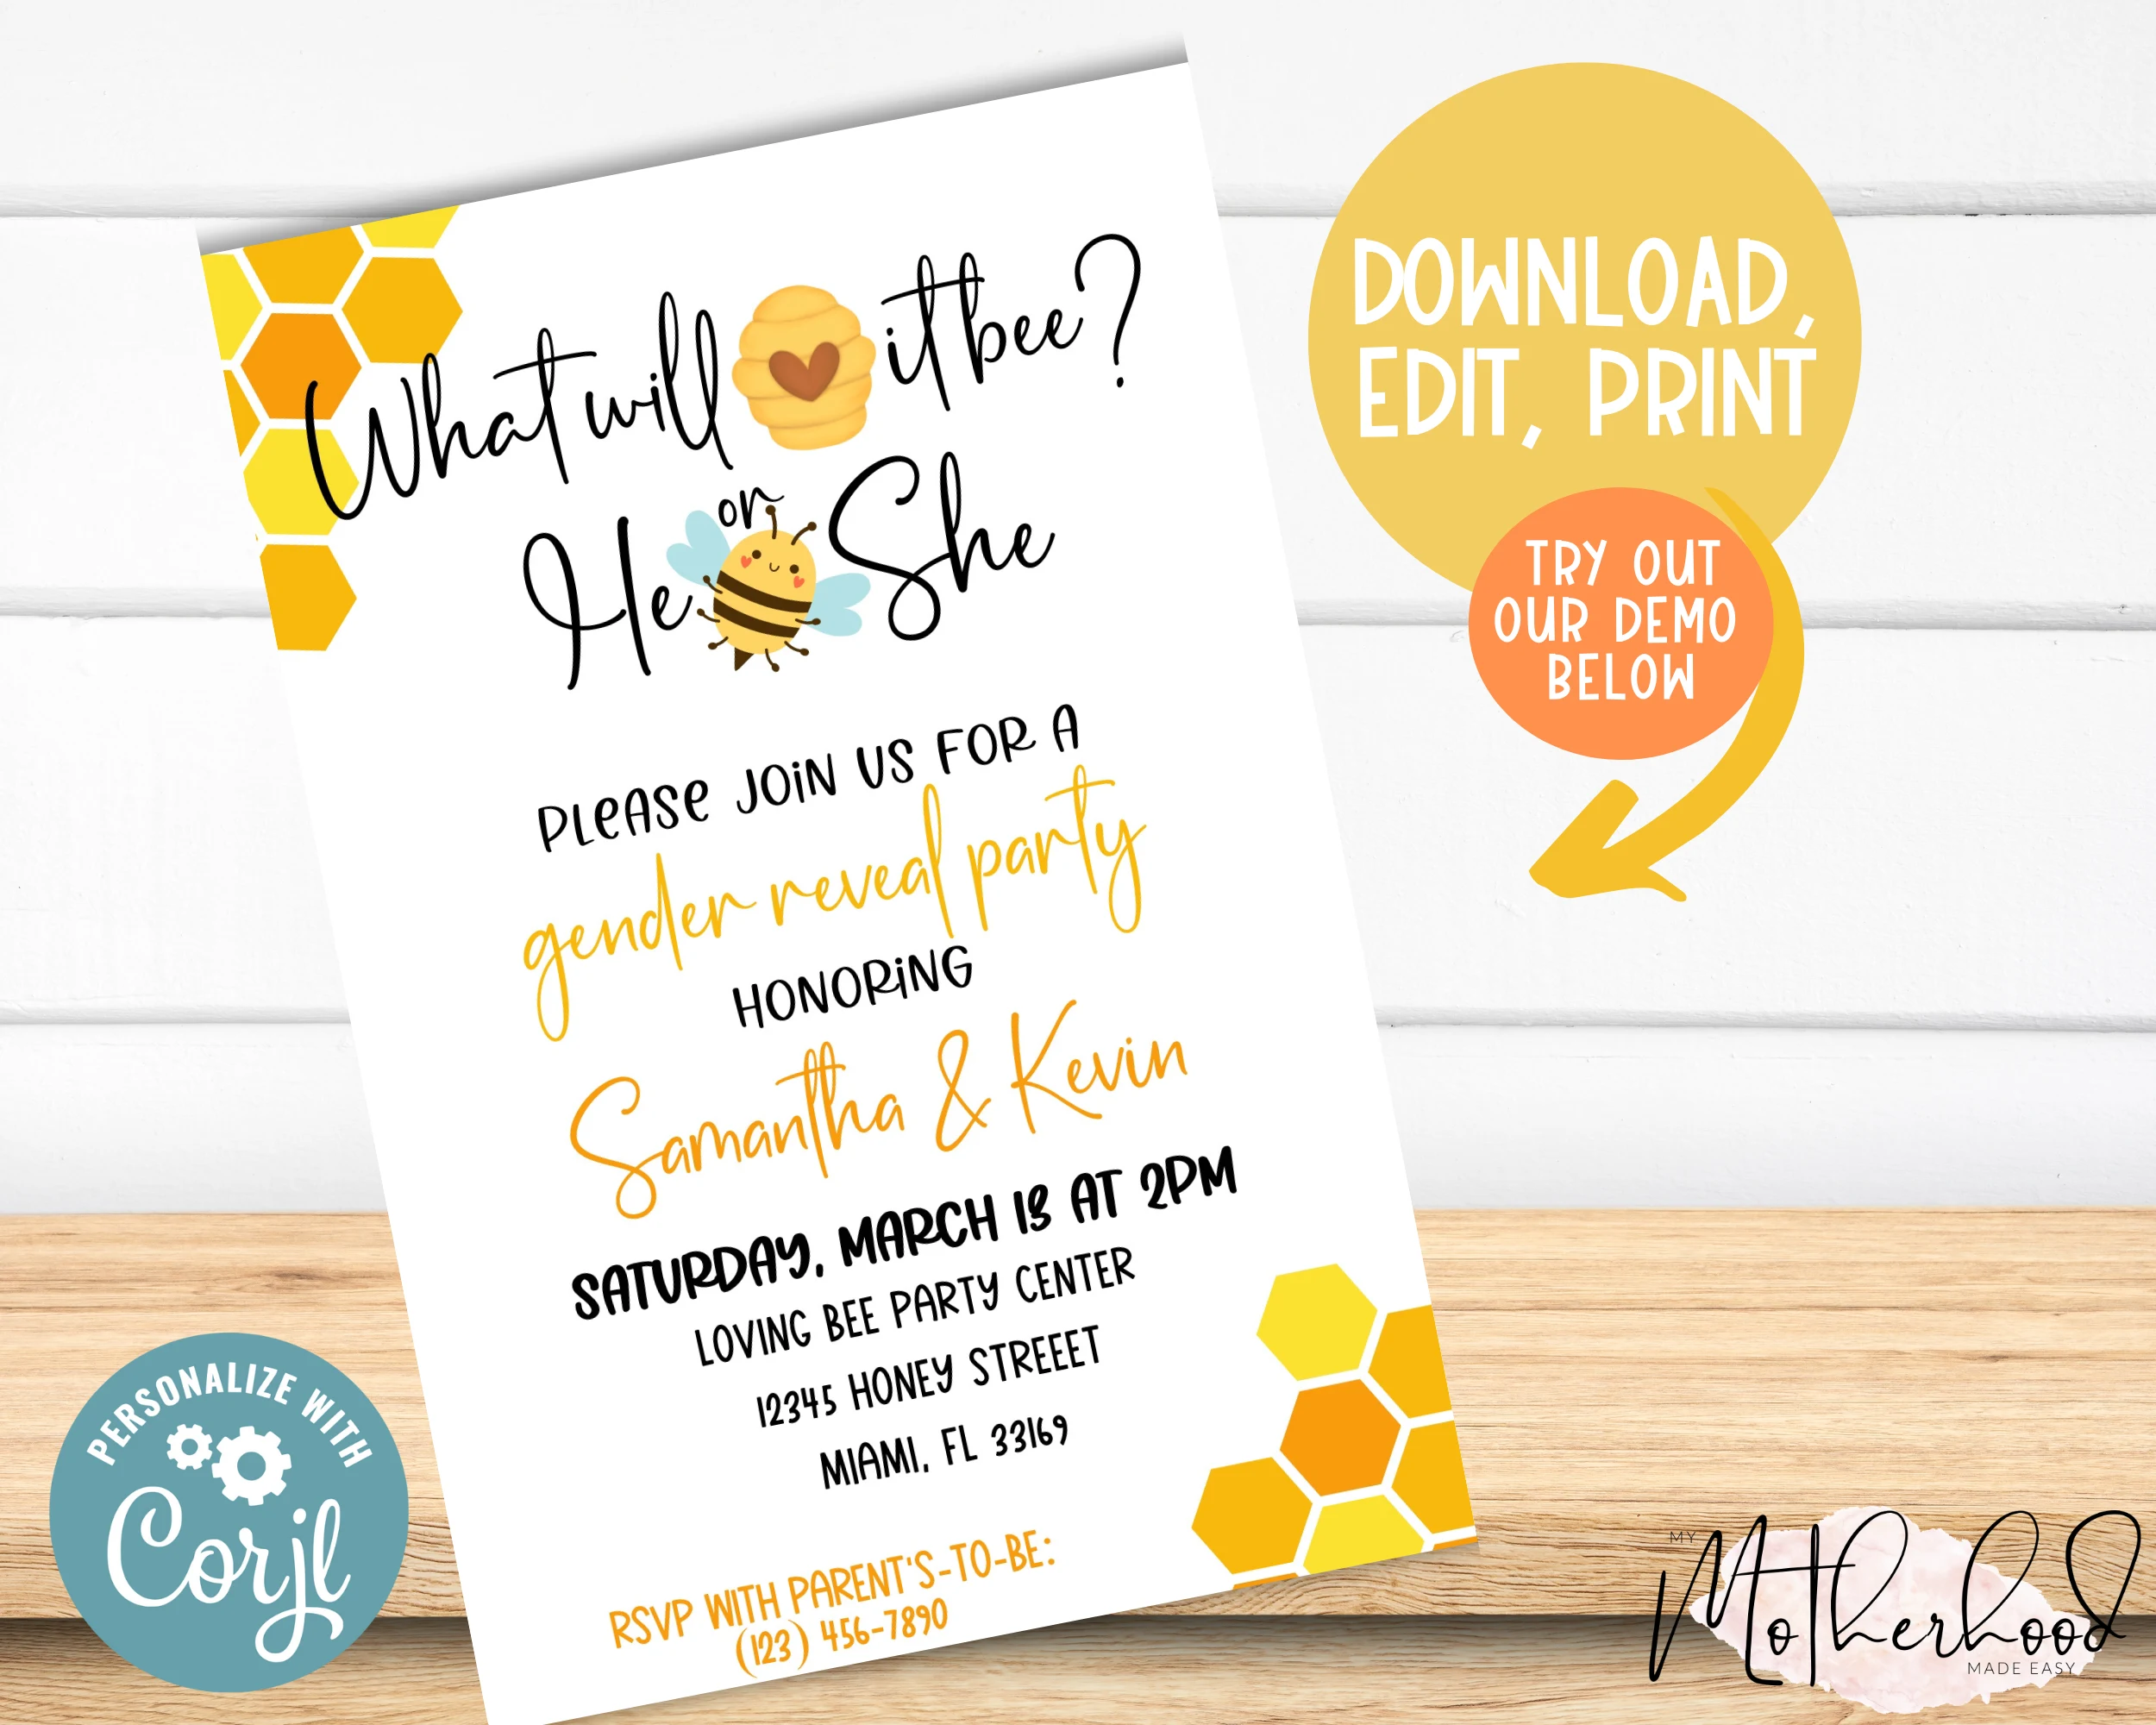 Editable What Will it Bee Themed Gender Reveal Party Invitation - Yellow - Honey- He or She- Boy or Girl-Baby Printable - Corji  Introducing the Editable What Will it Bee Themed Gender Reveal Party Invitation Card! This beautiful and personalizable Gender Reveal Party Invitation is the perfect way to invite your amazing friends and family to your gender reveal fiesta. With a variety of colors and fonts to choose from, you can easily customize this party announcement to perfectly reflect your style. Whether you're sharing on social media or sending out physical party invitations, this stunning Gender Reveal Party Invitation is sure to get everyone excited for your baby reveal.